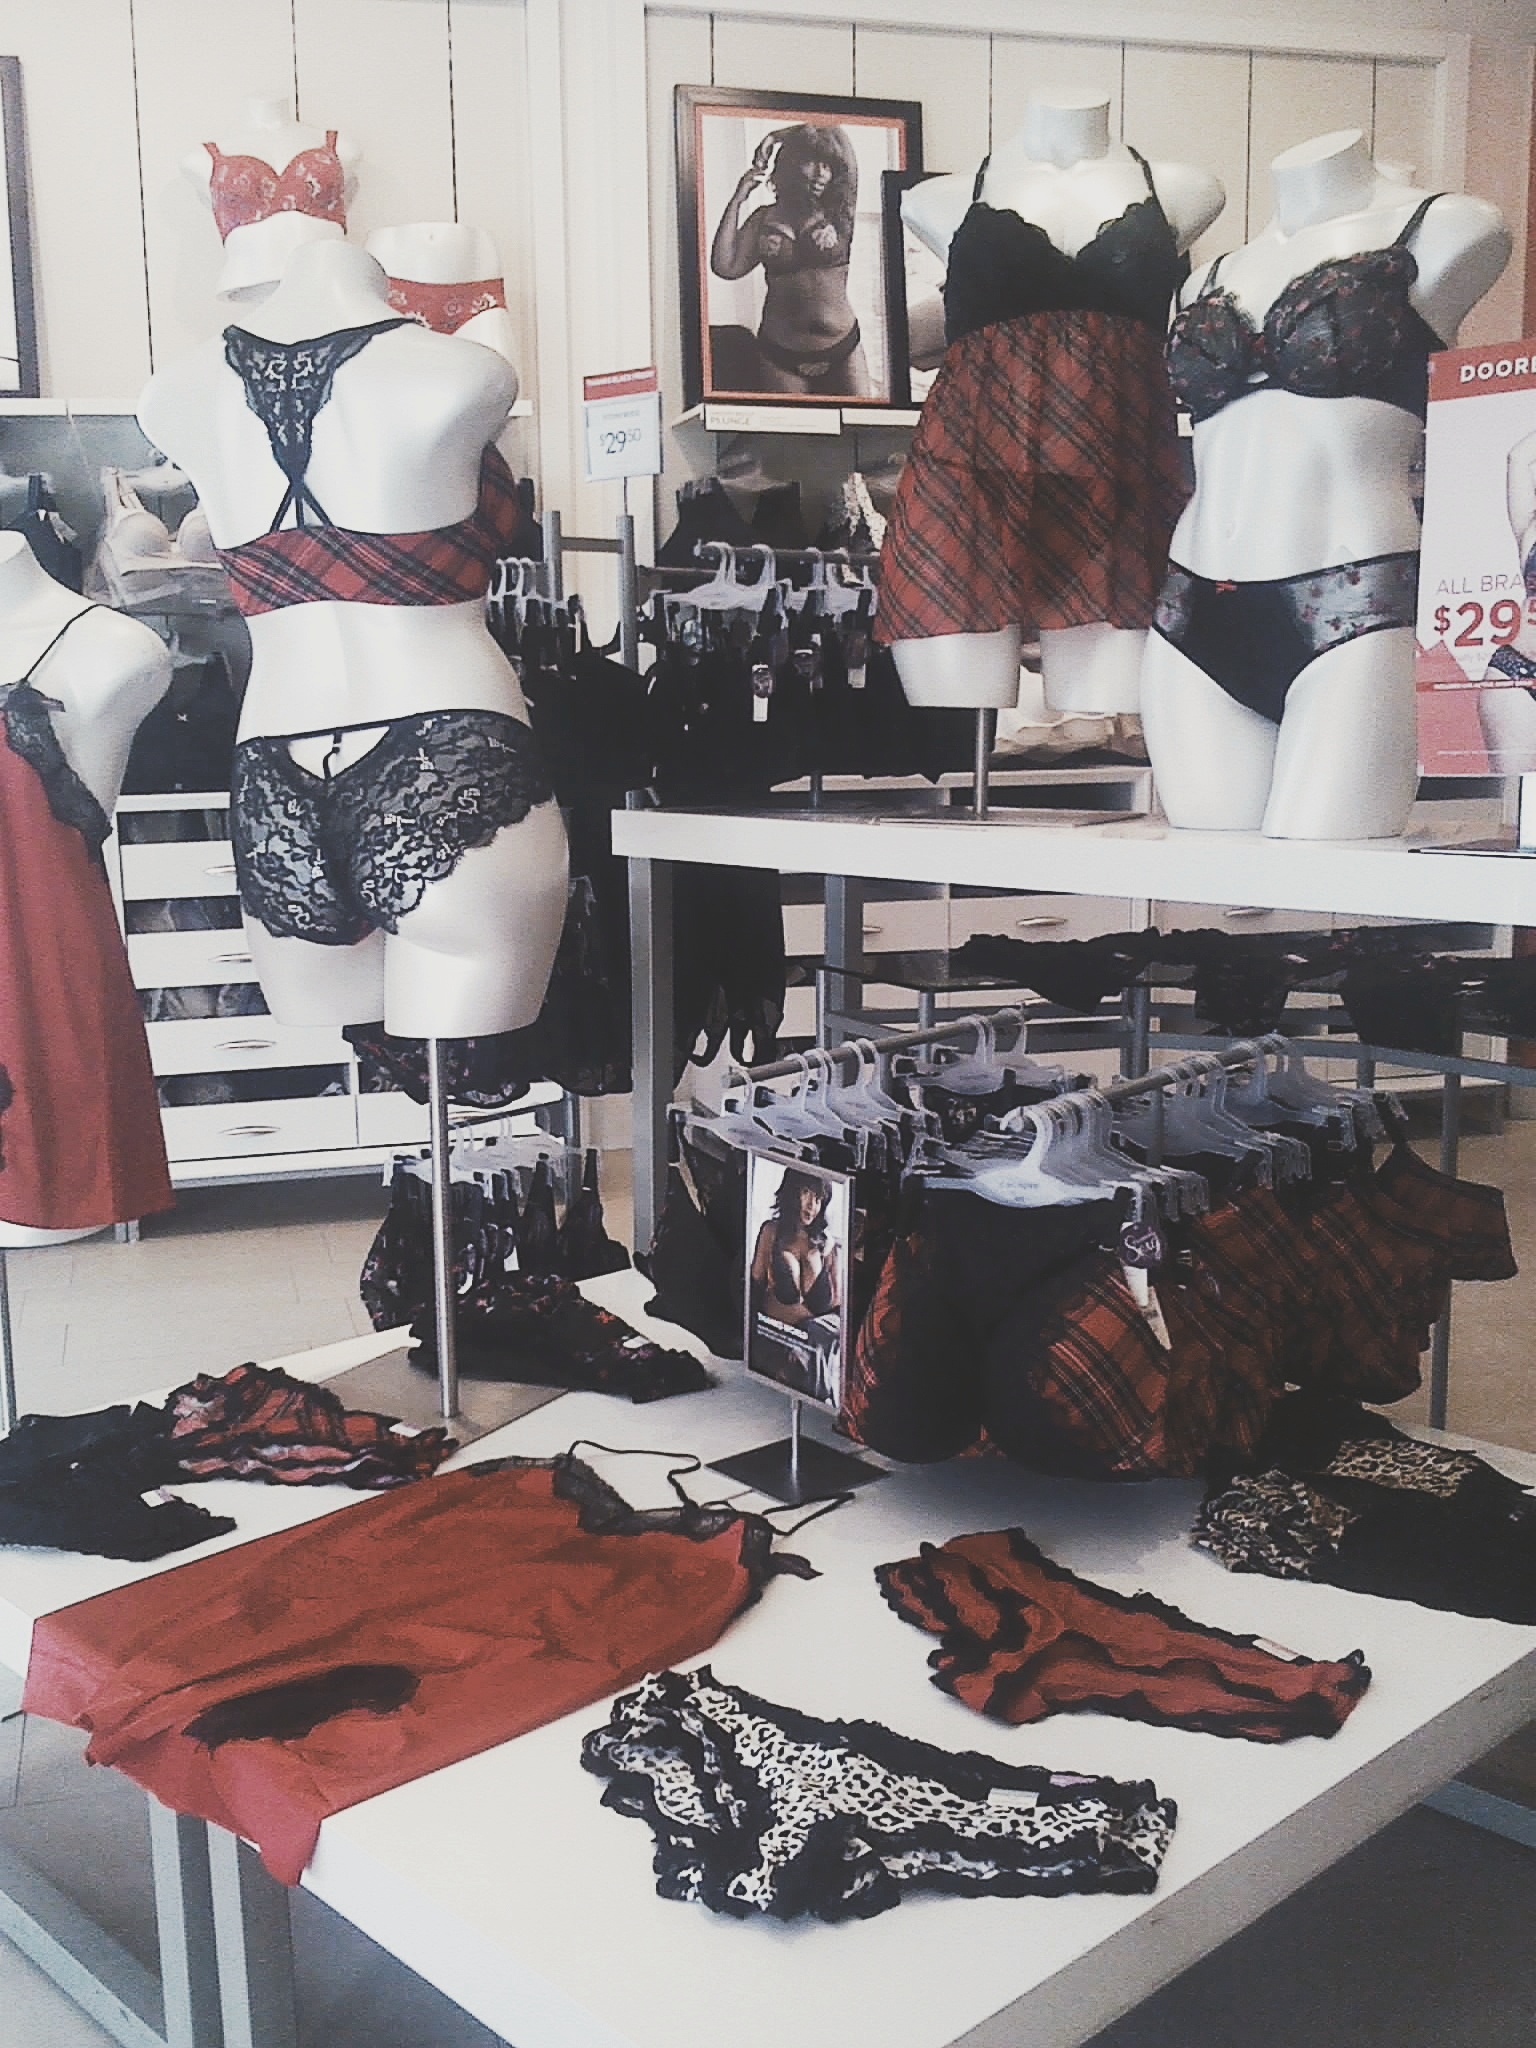 8 Things To Keep In Mind When Shopping For Lingerie